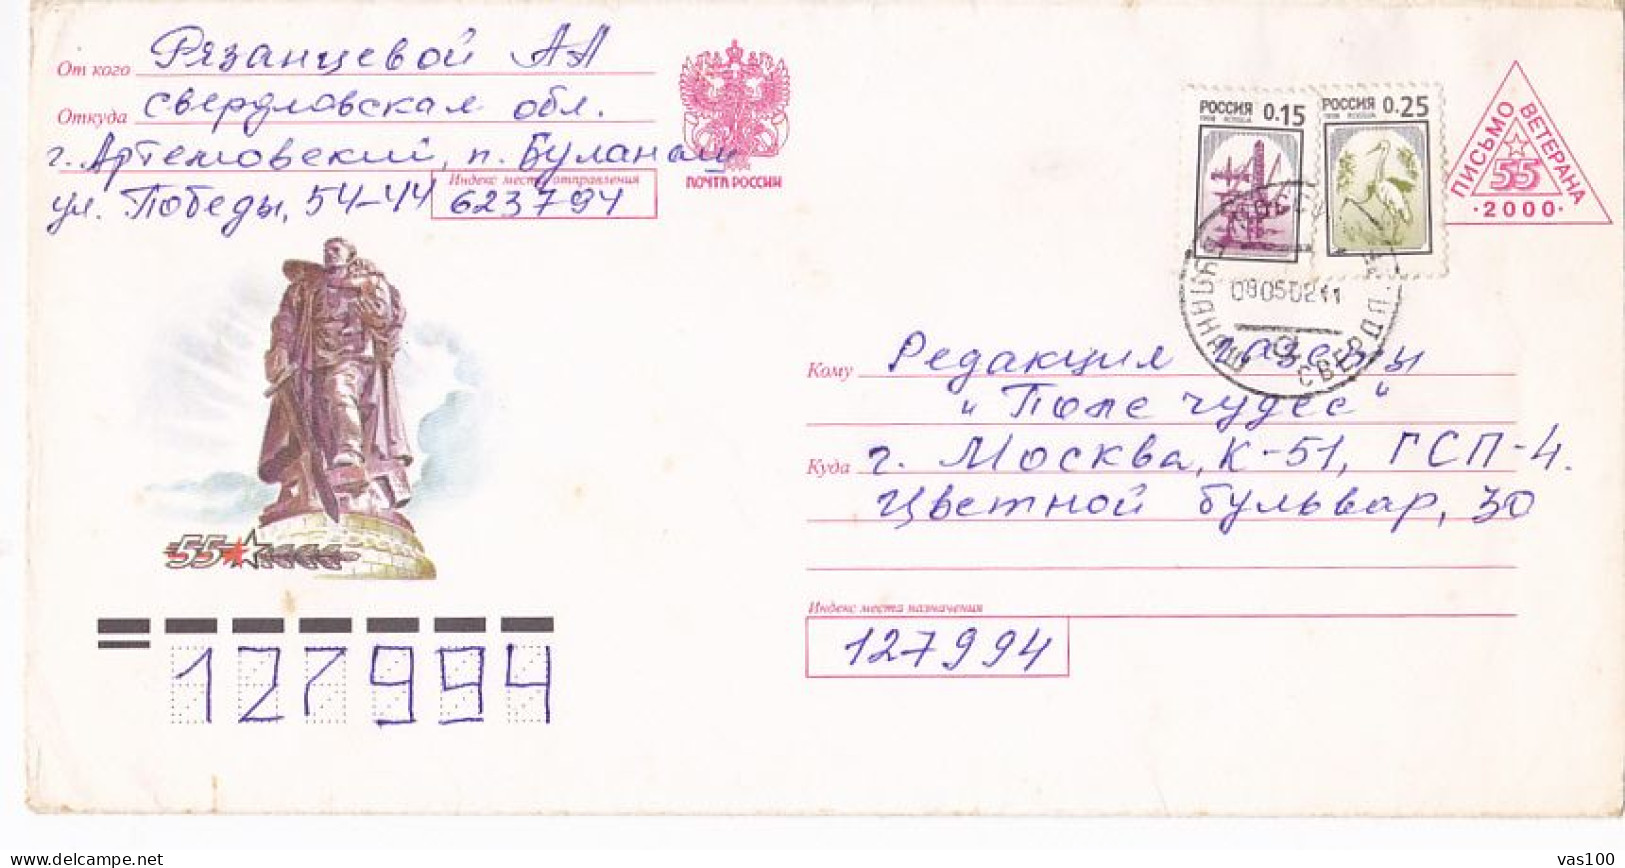 END OF WW2 ANNIVERSARY, MONUMENT, COVER STATIONERY, ENTIER POSTAL, 2000, RUSSIA - Entiers Postaux